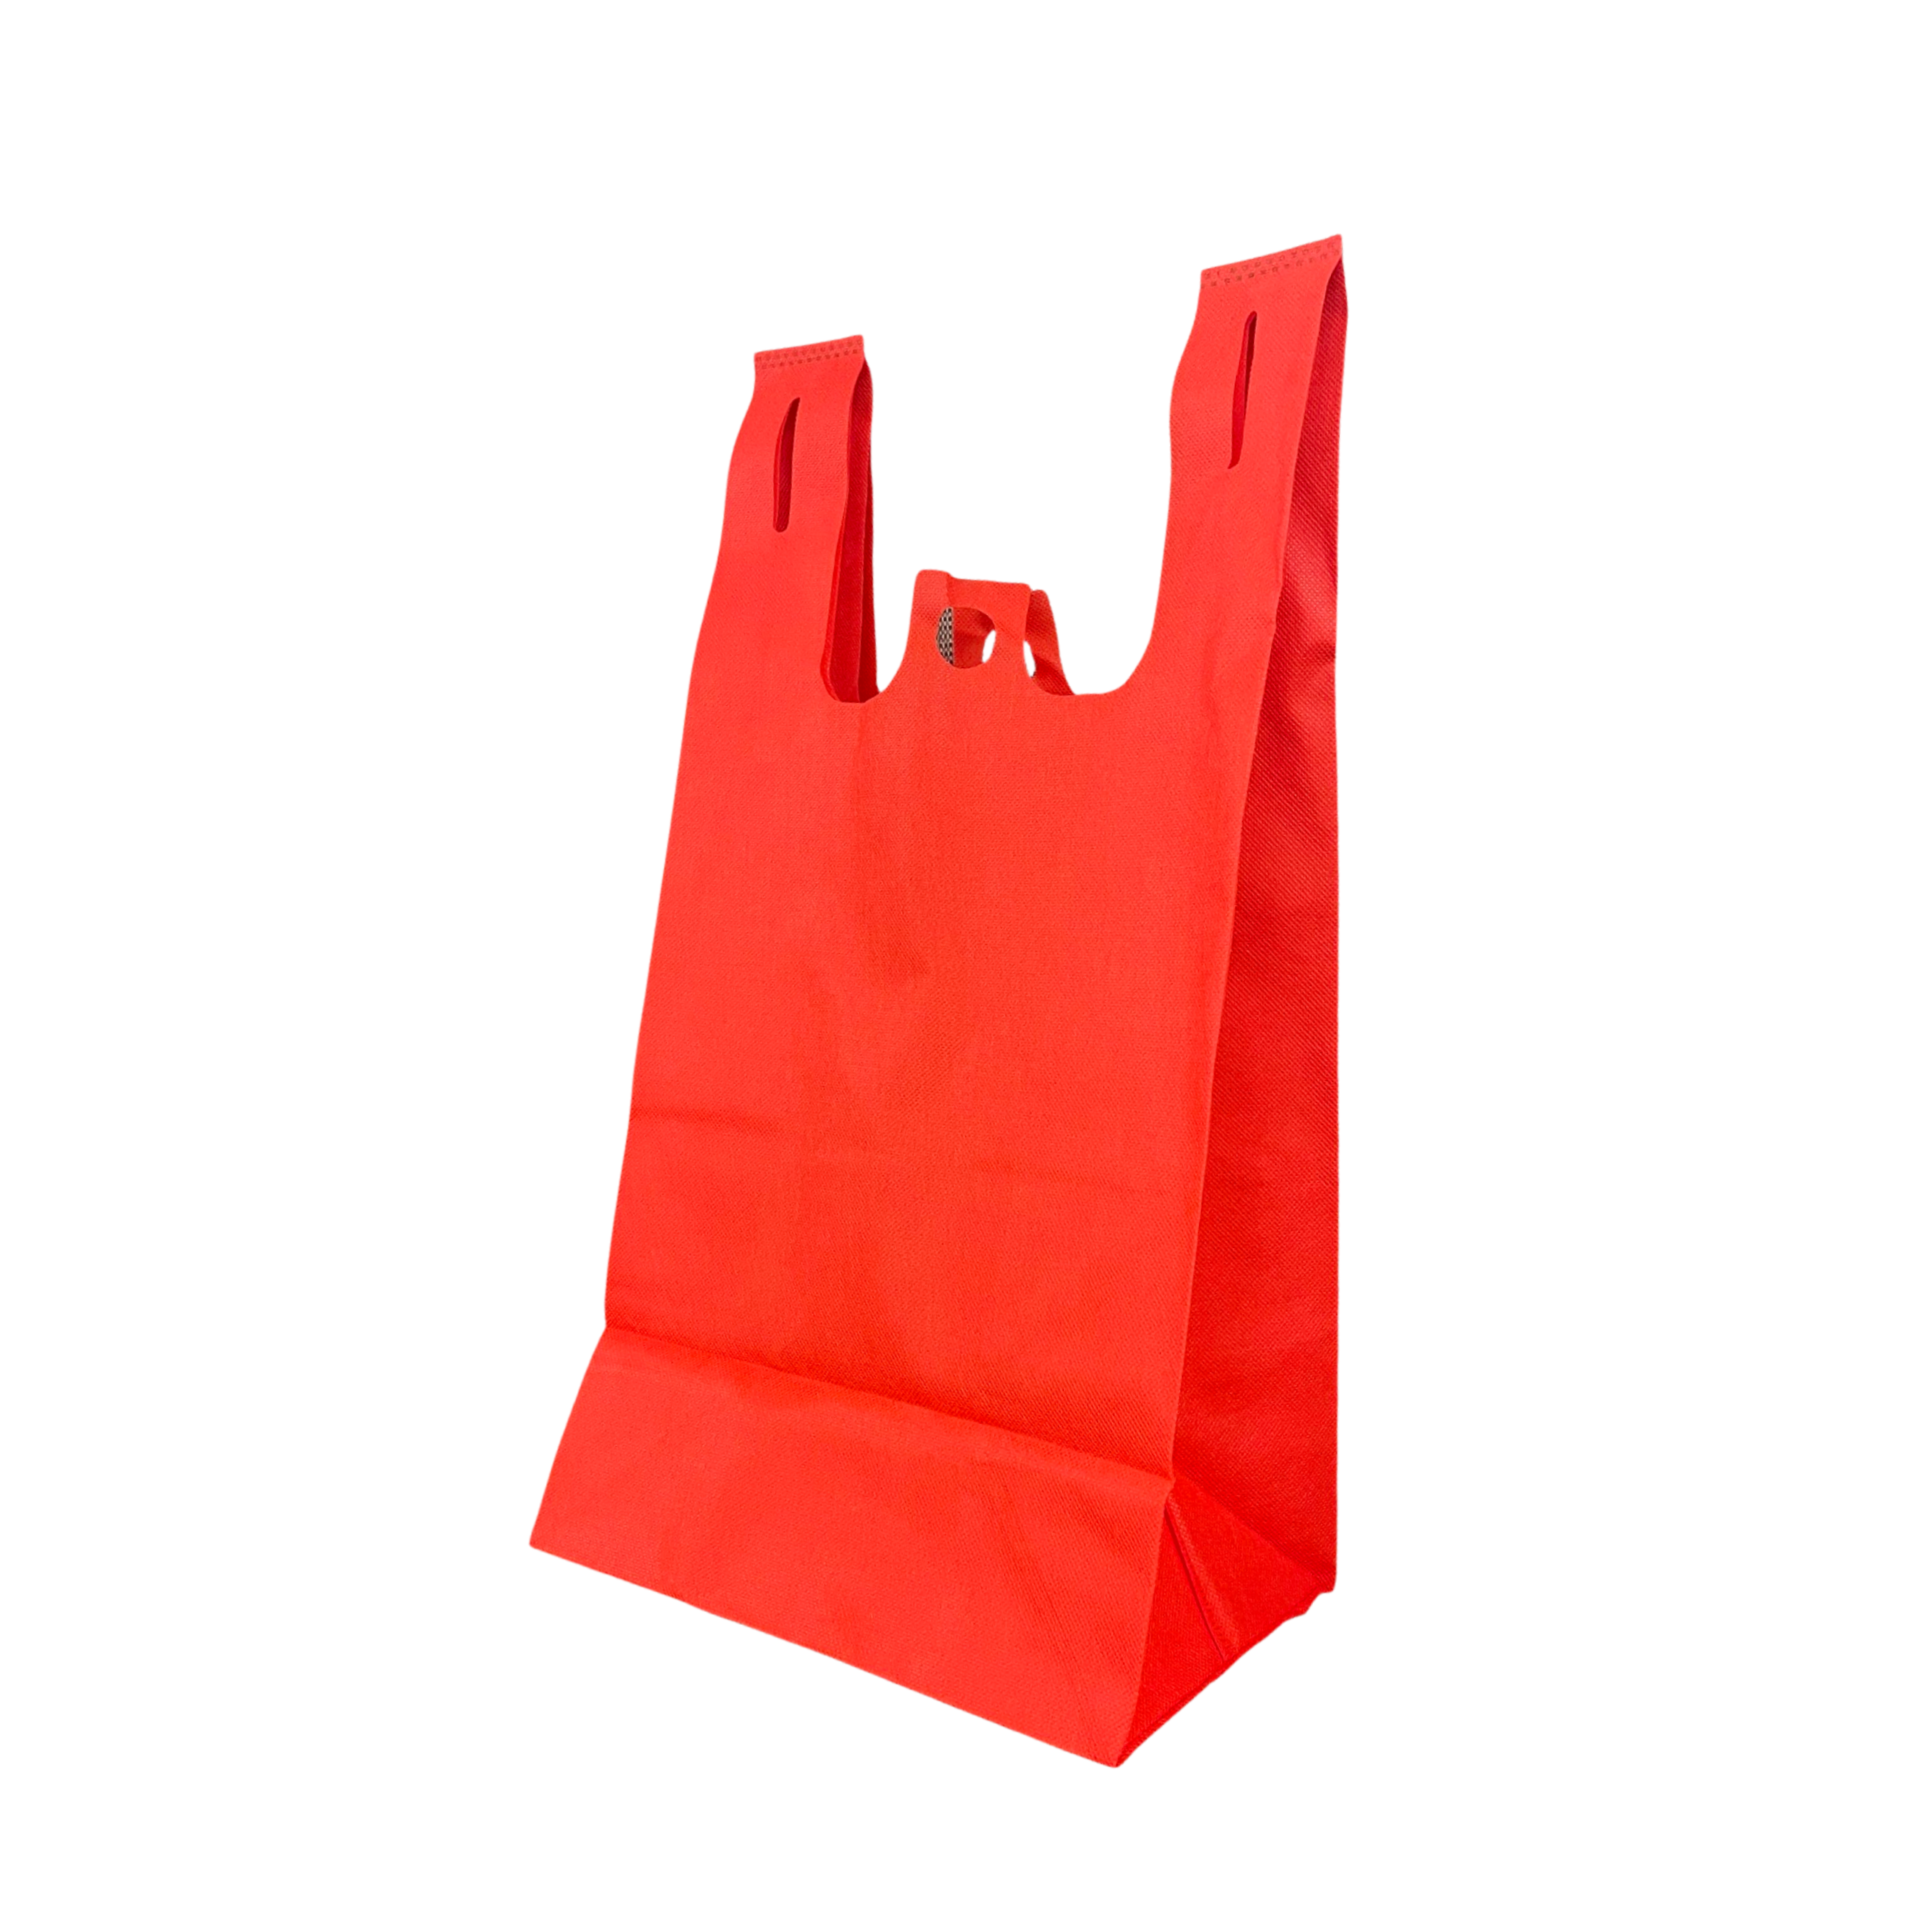 200pcs, T-Shirt Bag, 11x7x20x7 inches, Red Non-Woven Reusable Shopping Bags, with Square Bottom